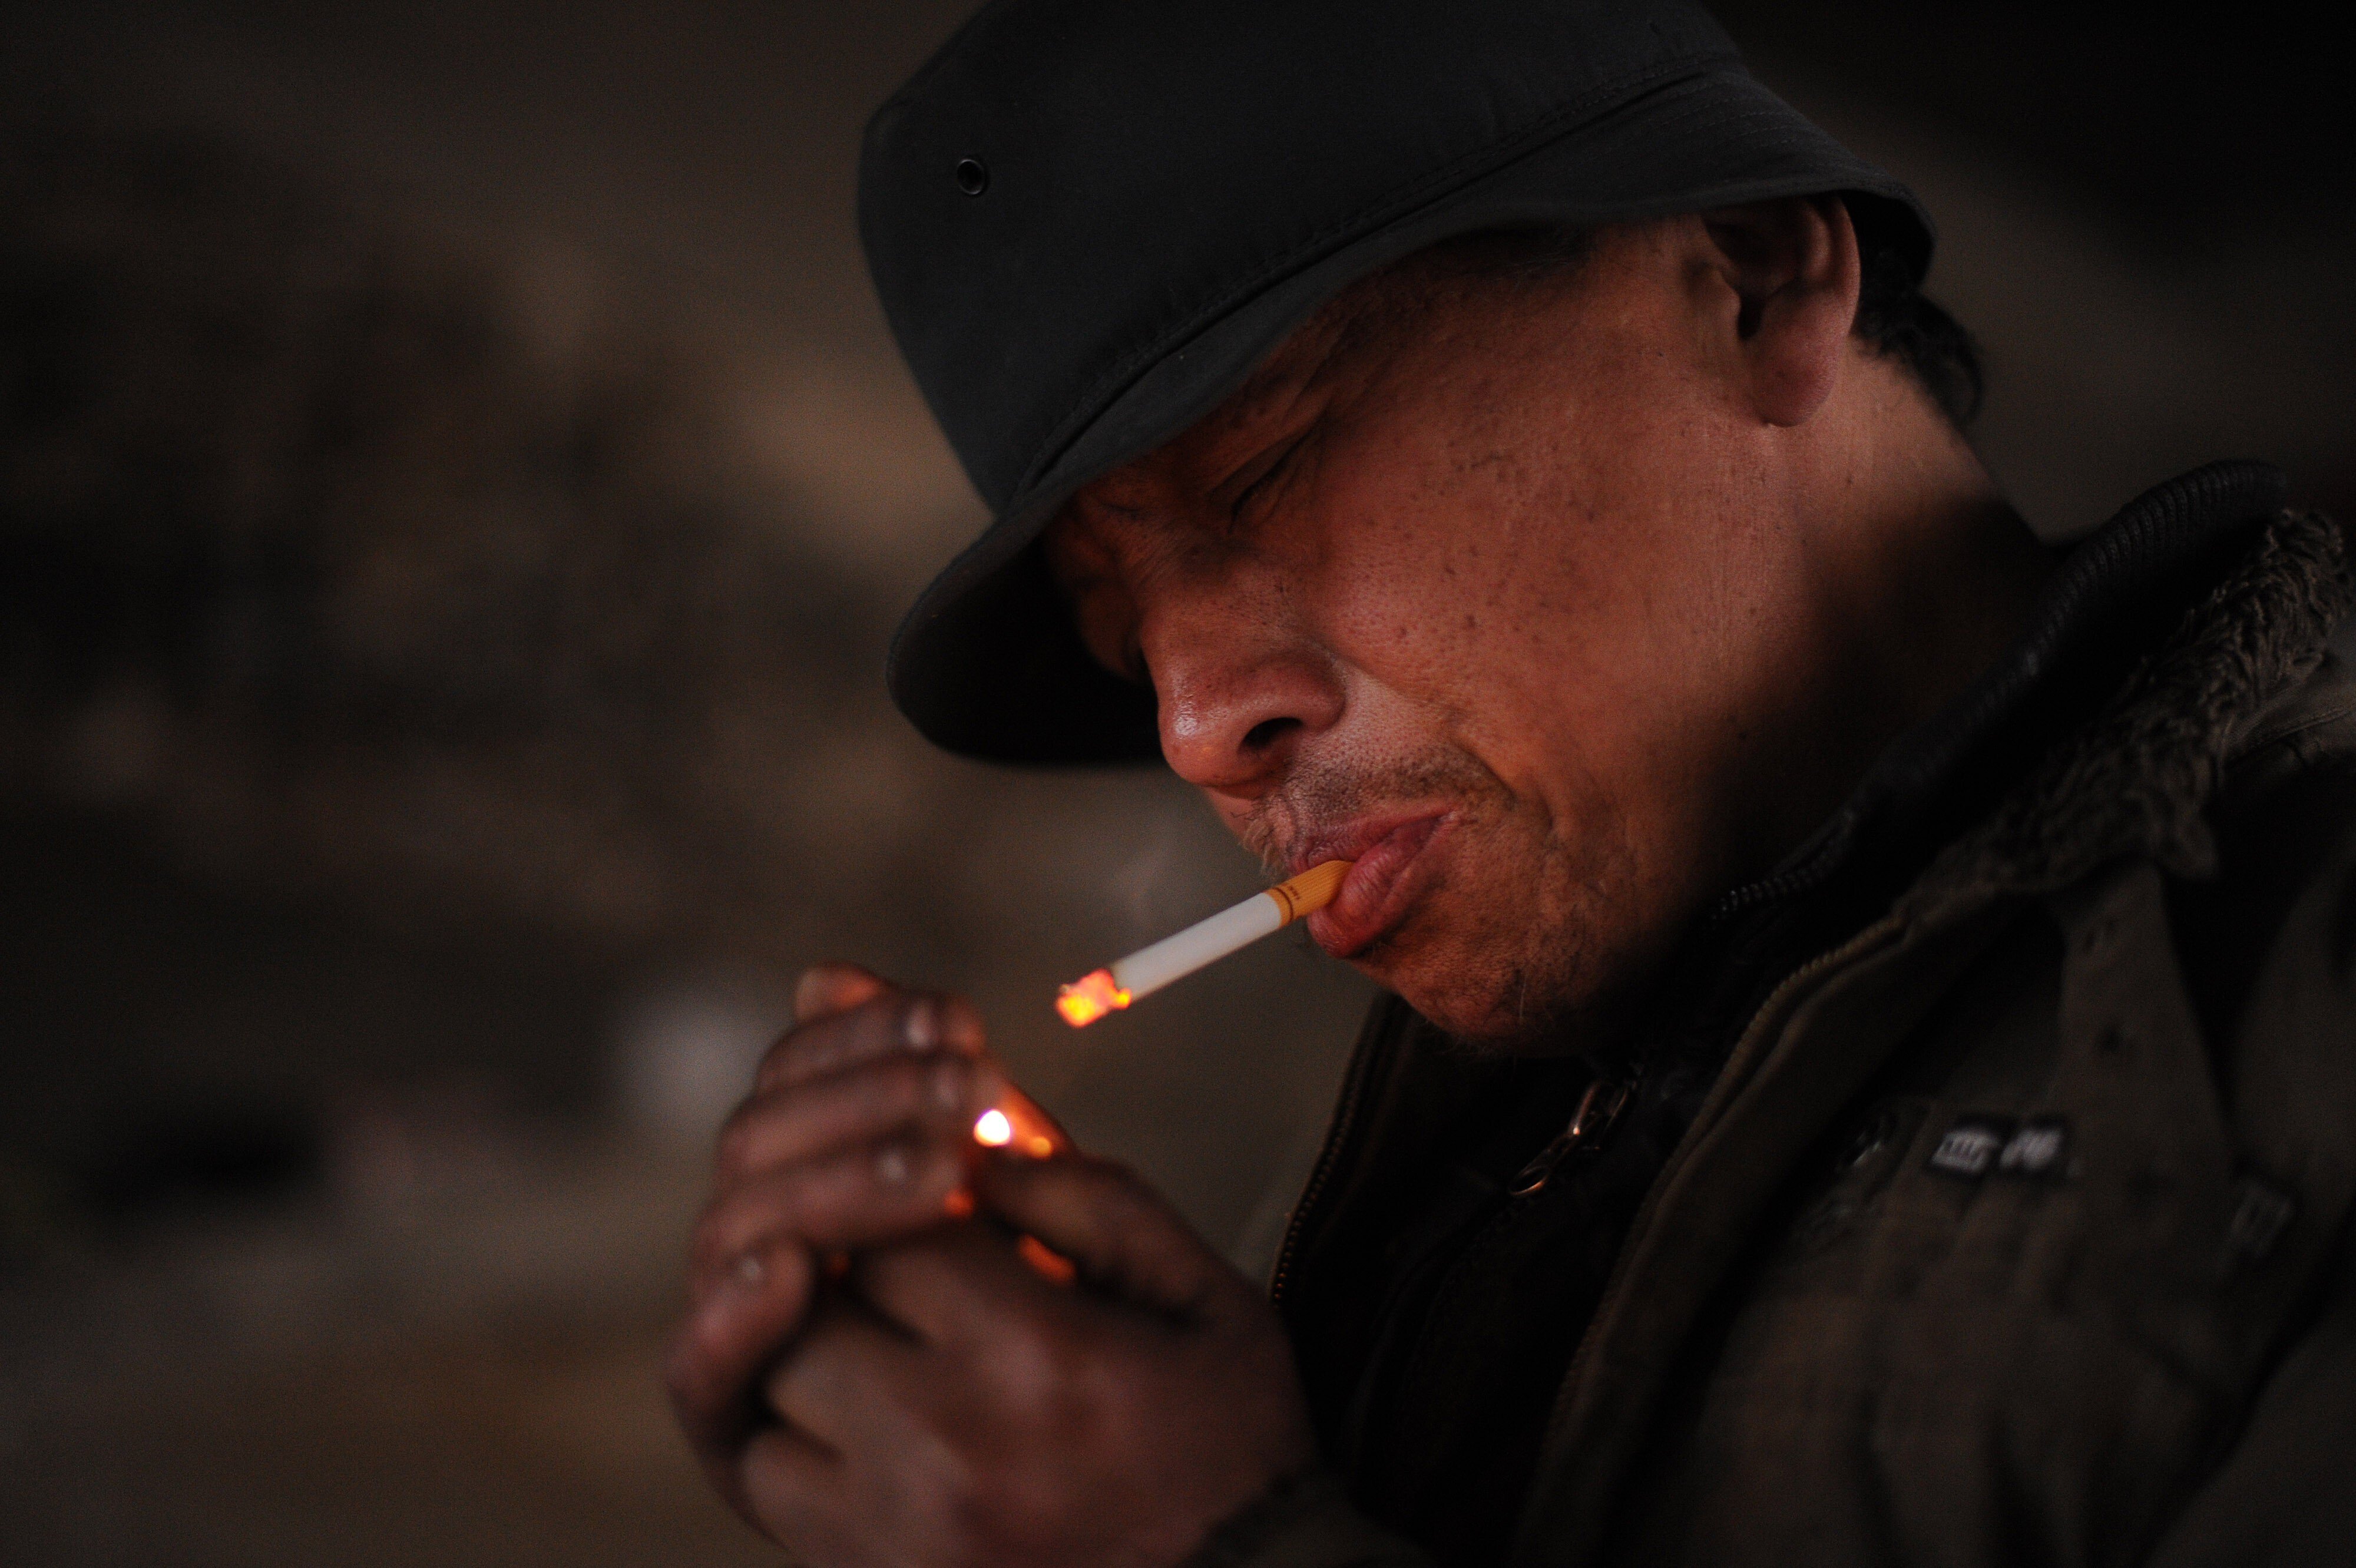 A homeless man lights up a cigarette in Hefei, Anhui province. In the study, those in poor areas had a 34.2 per cent smoking rate compared to the national average of 26.6 per cent. Photo: AFP